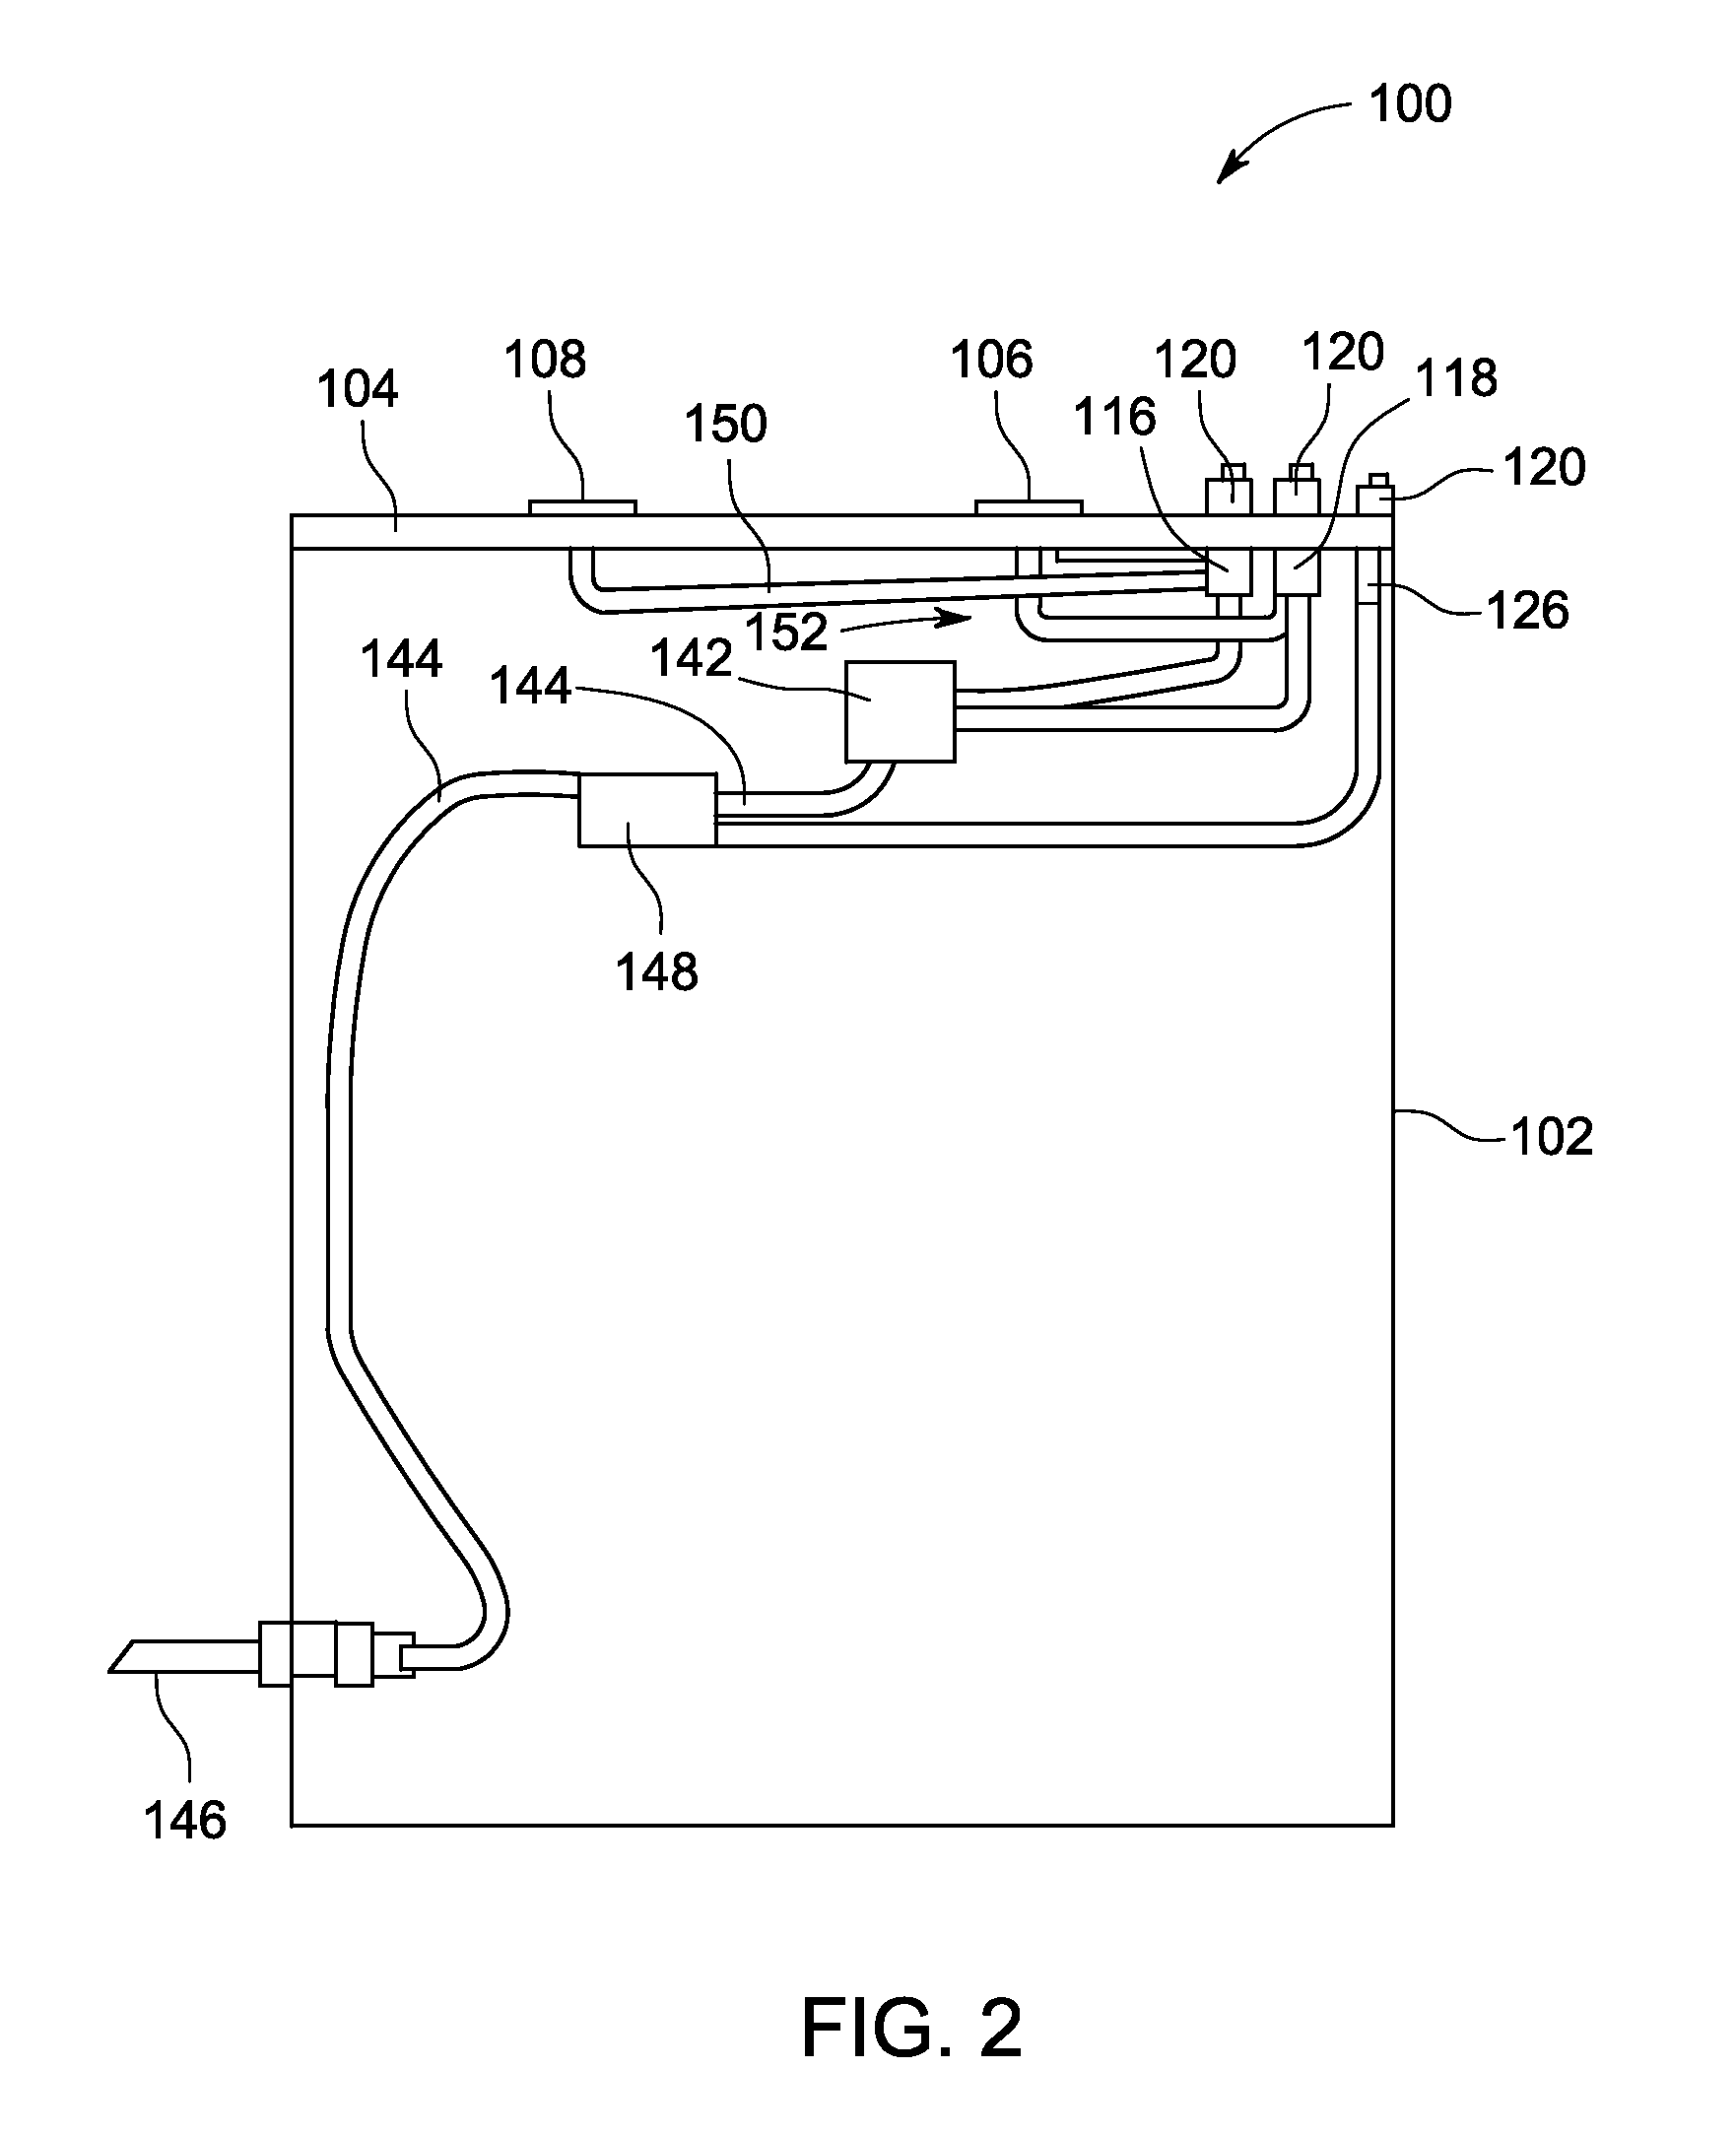 Orifice holder and tube assembly for use with a gas-fueled appliance